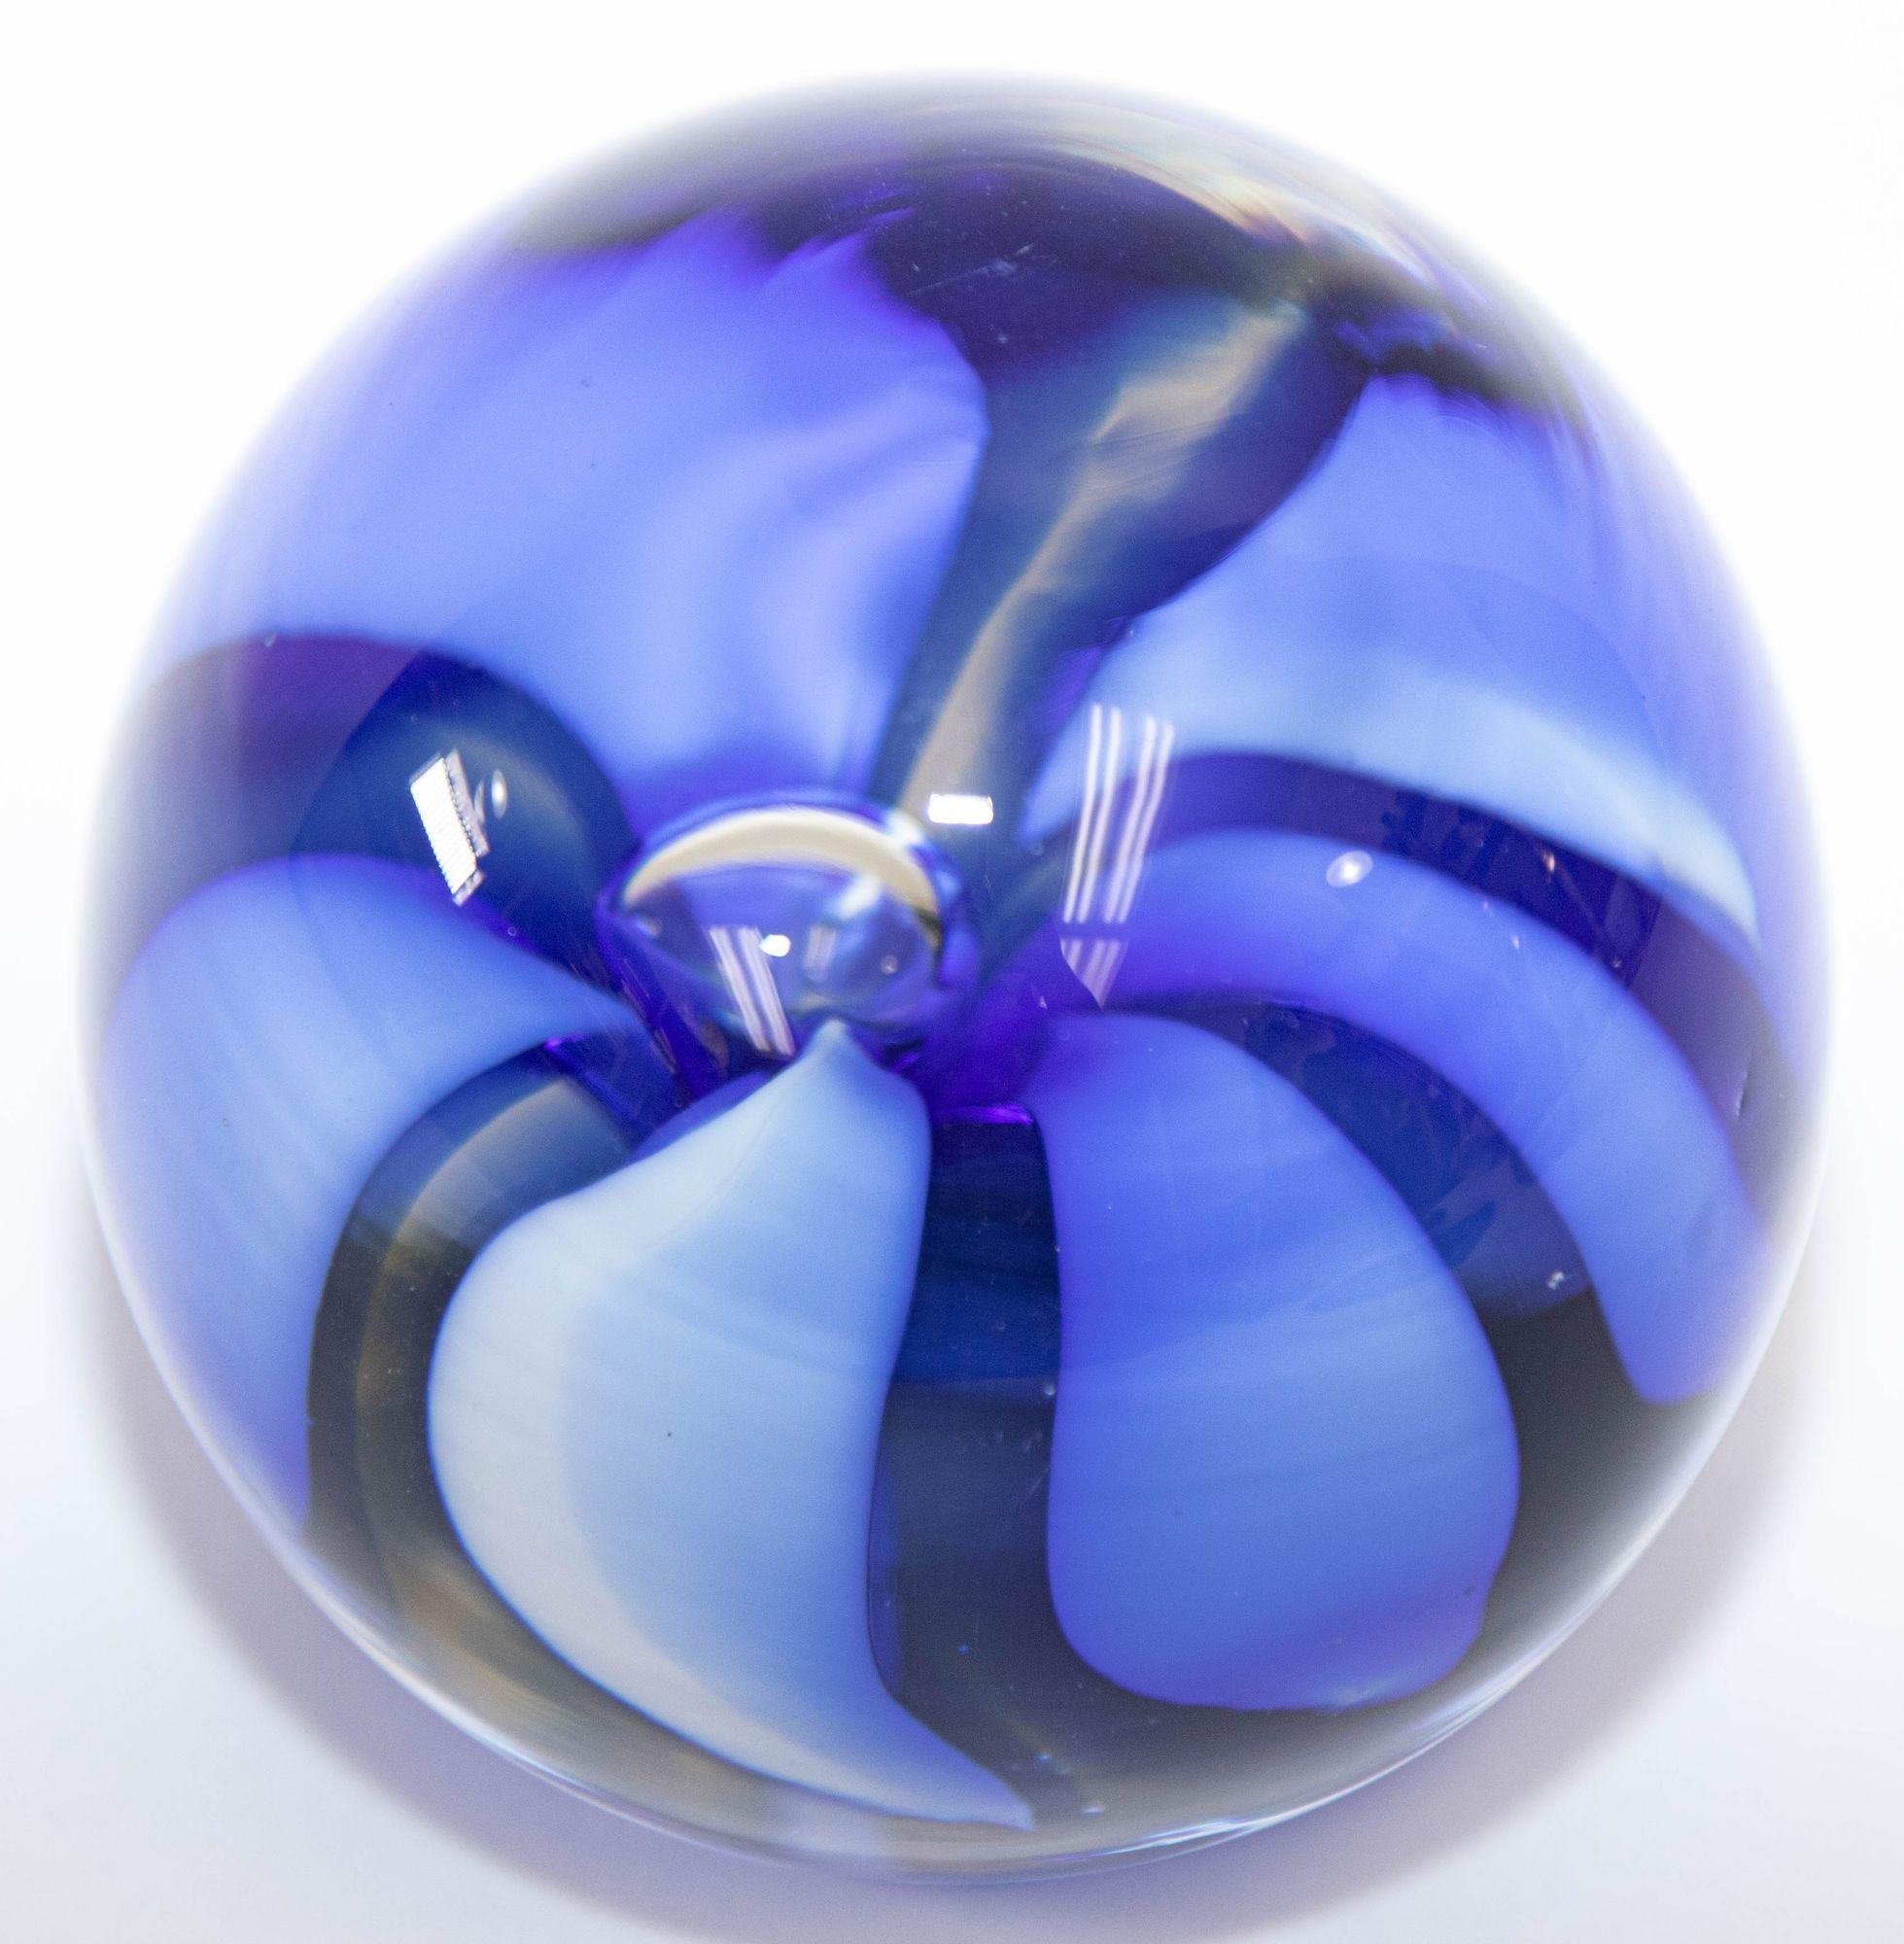 Vintage ICET Murano glass paperweight with cobalt blue flower Mid-Century Modern.
Large Icet Arte Murano heavy hand blown glass paperweight with cobalt blue flower inset.
Gorgeous Vintage Art Glass abstract floral design paperweight.
Italian